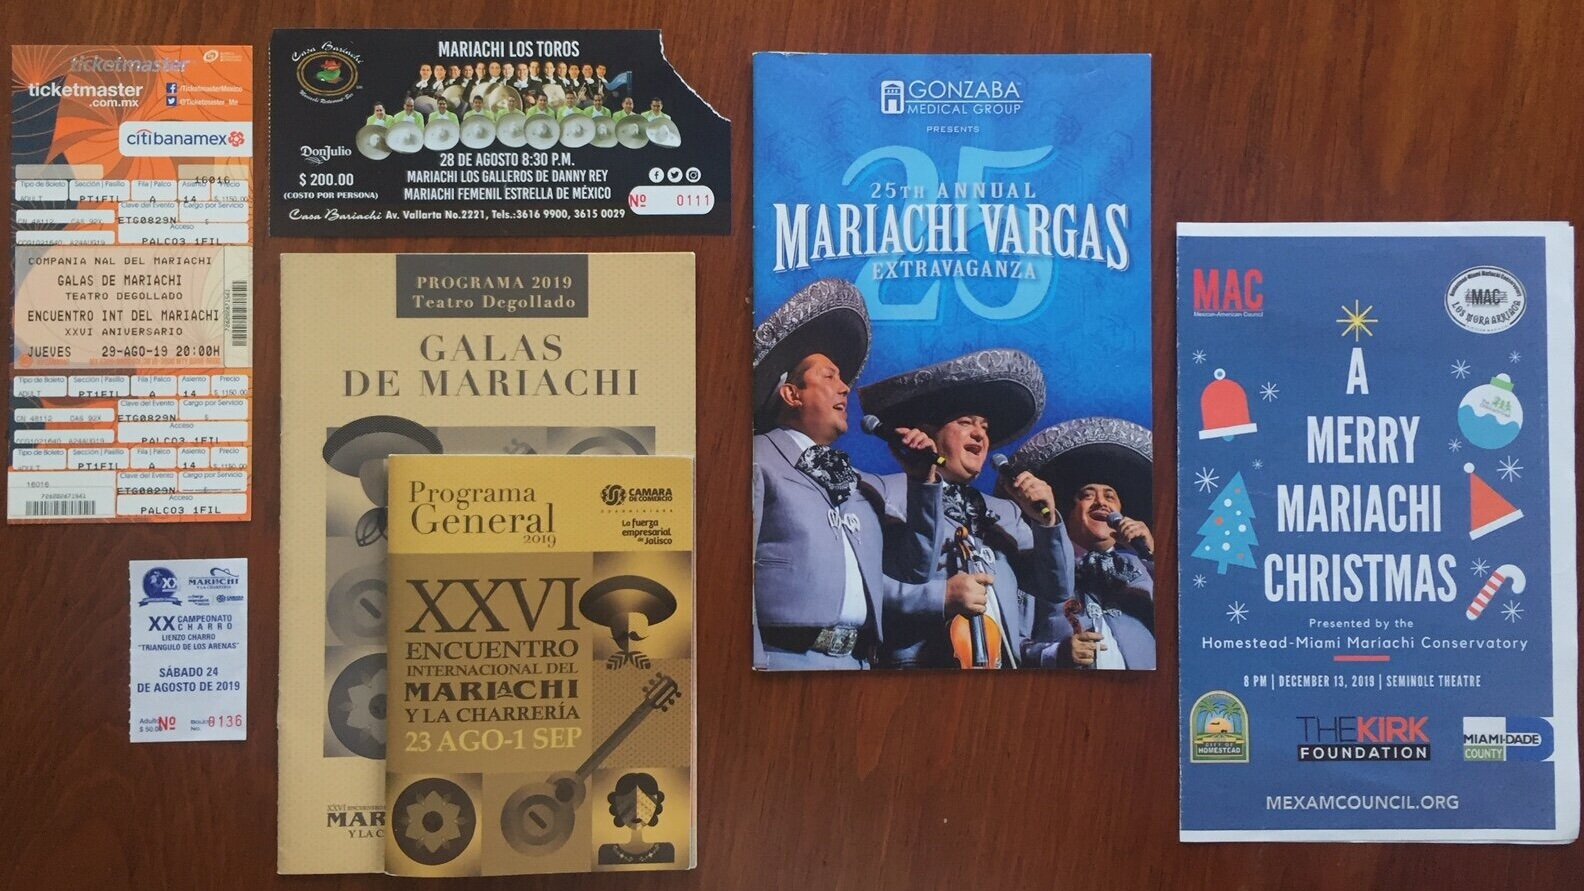 Tickets from mariachi events attended in Guadalajara, Mexico and San Antonio, Texas